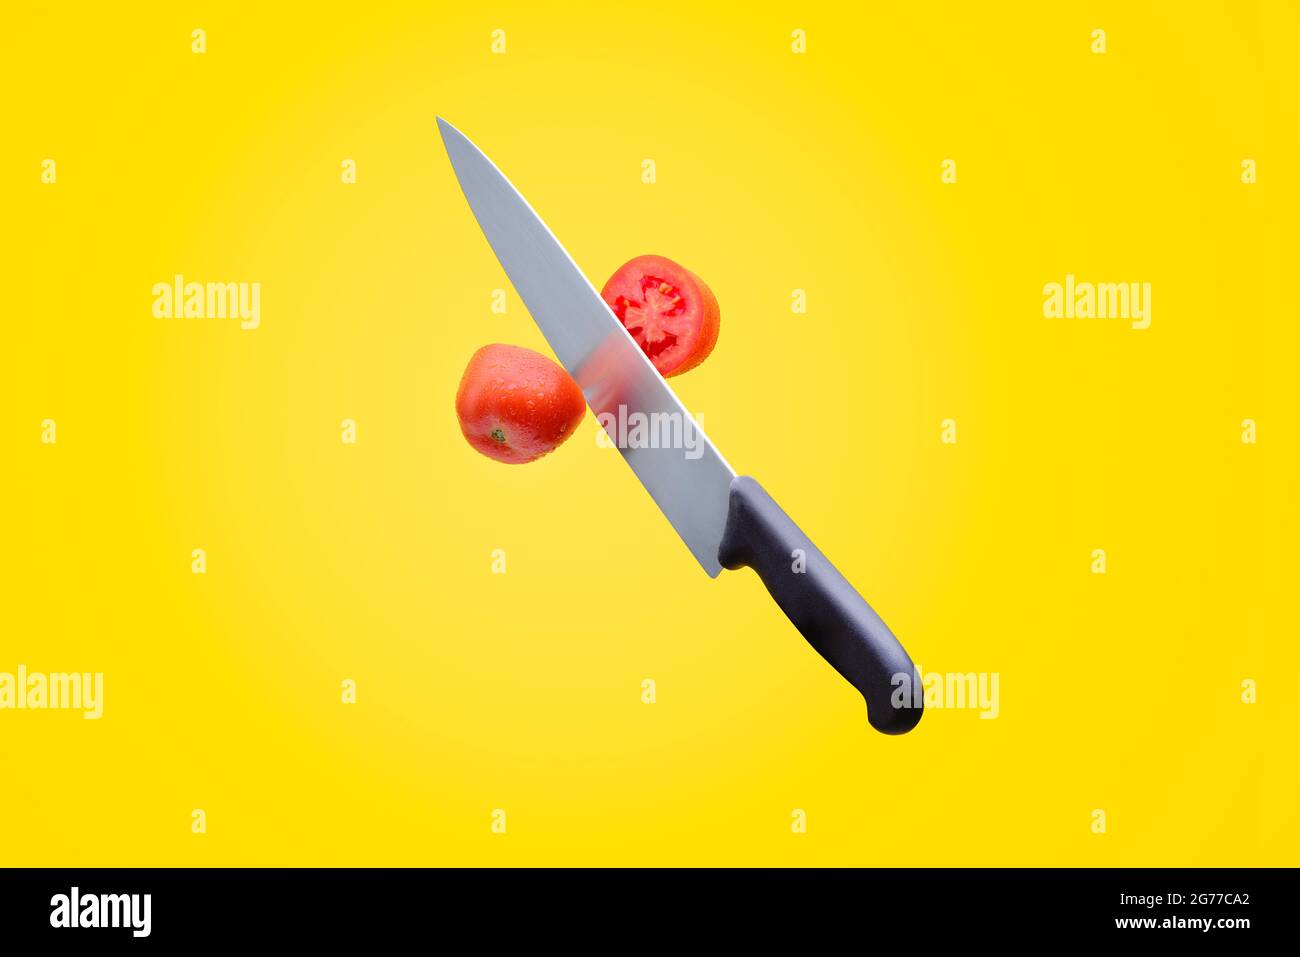 knife cut red tomato, Mexican tomato, yellow background, fresh fruit, cut in the air, chef's knife Stock Photo